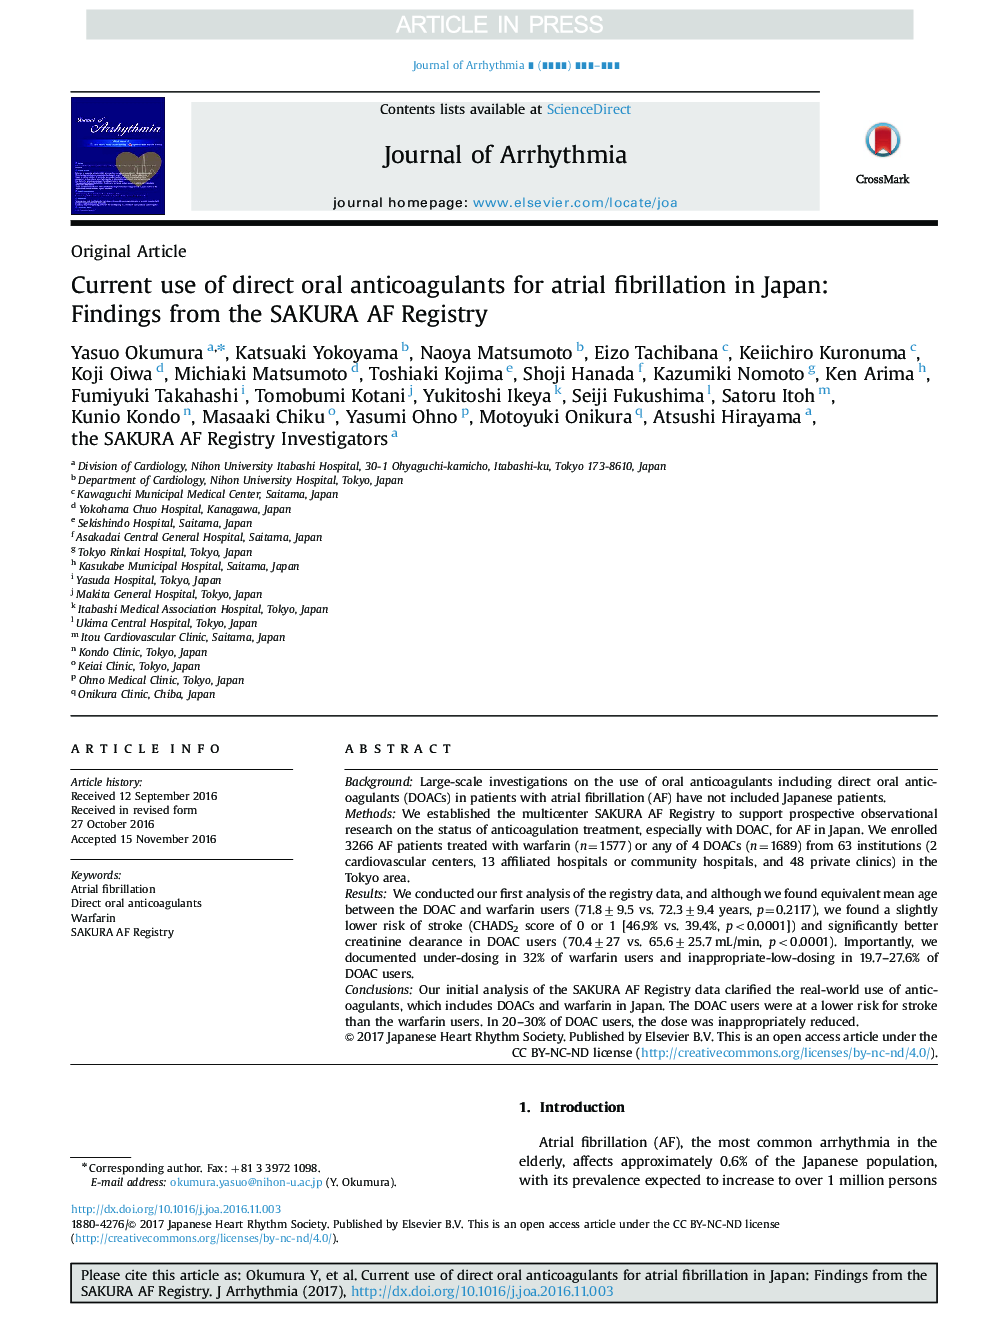 Current use of direct oral anticoagulants for atrial fibrillation in Japan: Findings from the SAKURA AF Registry